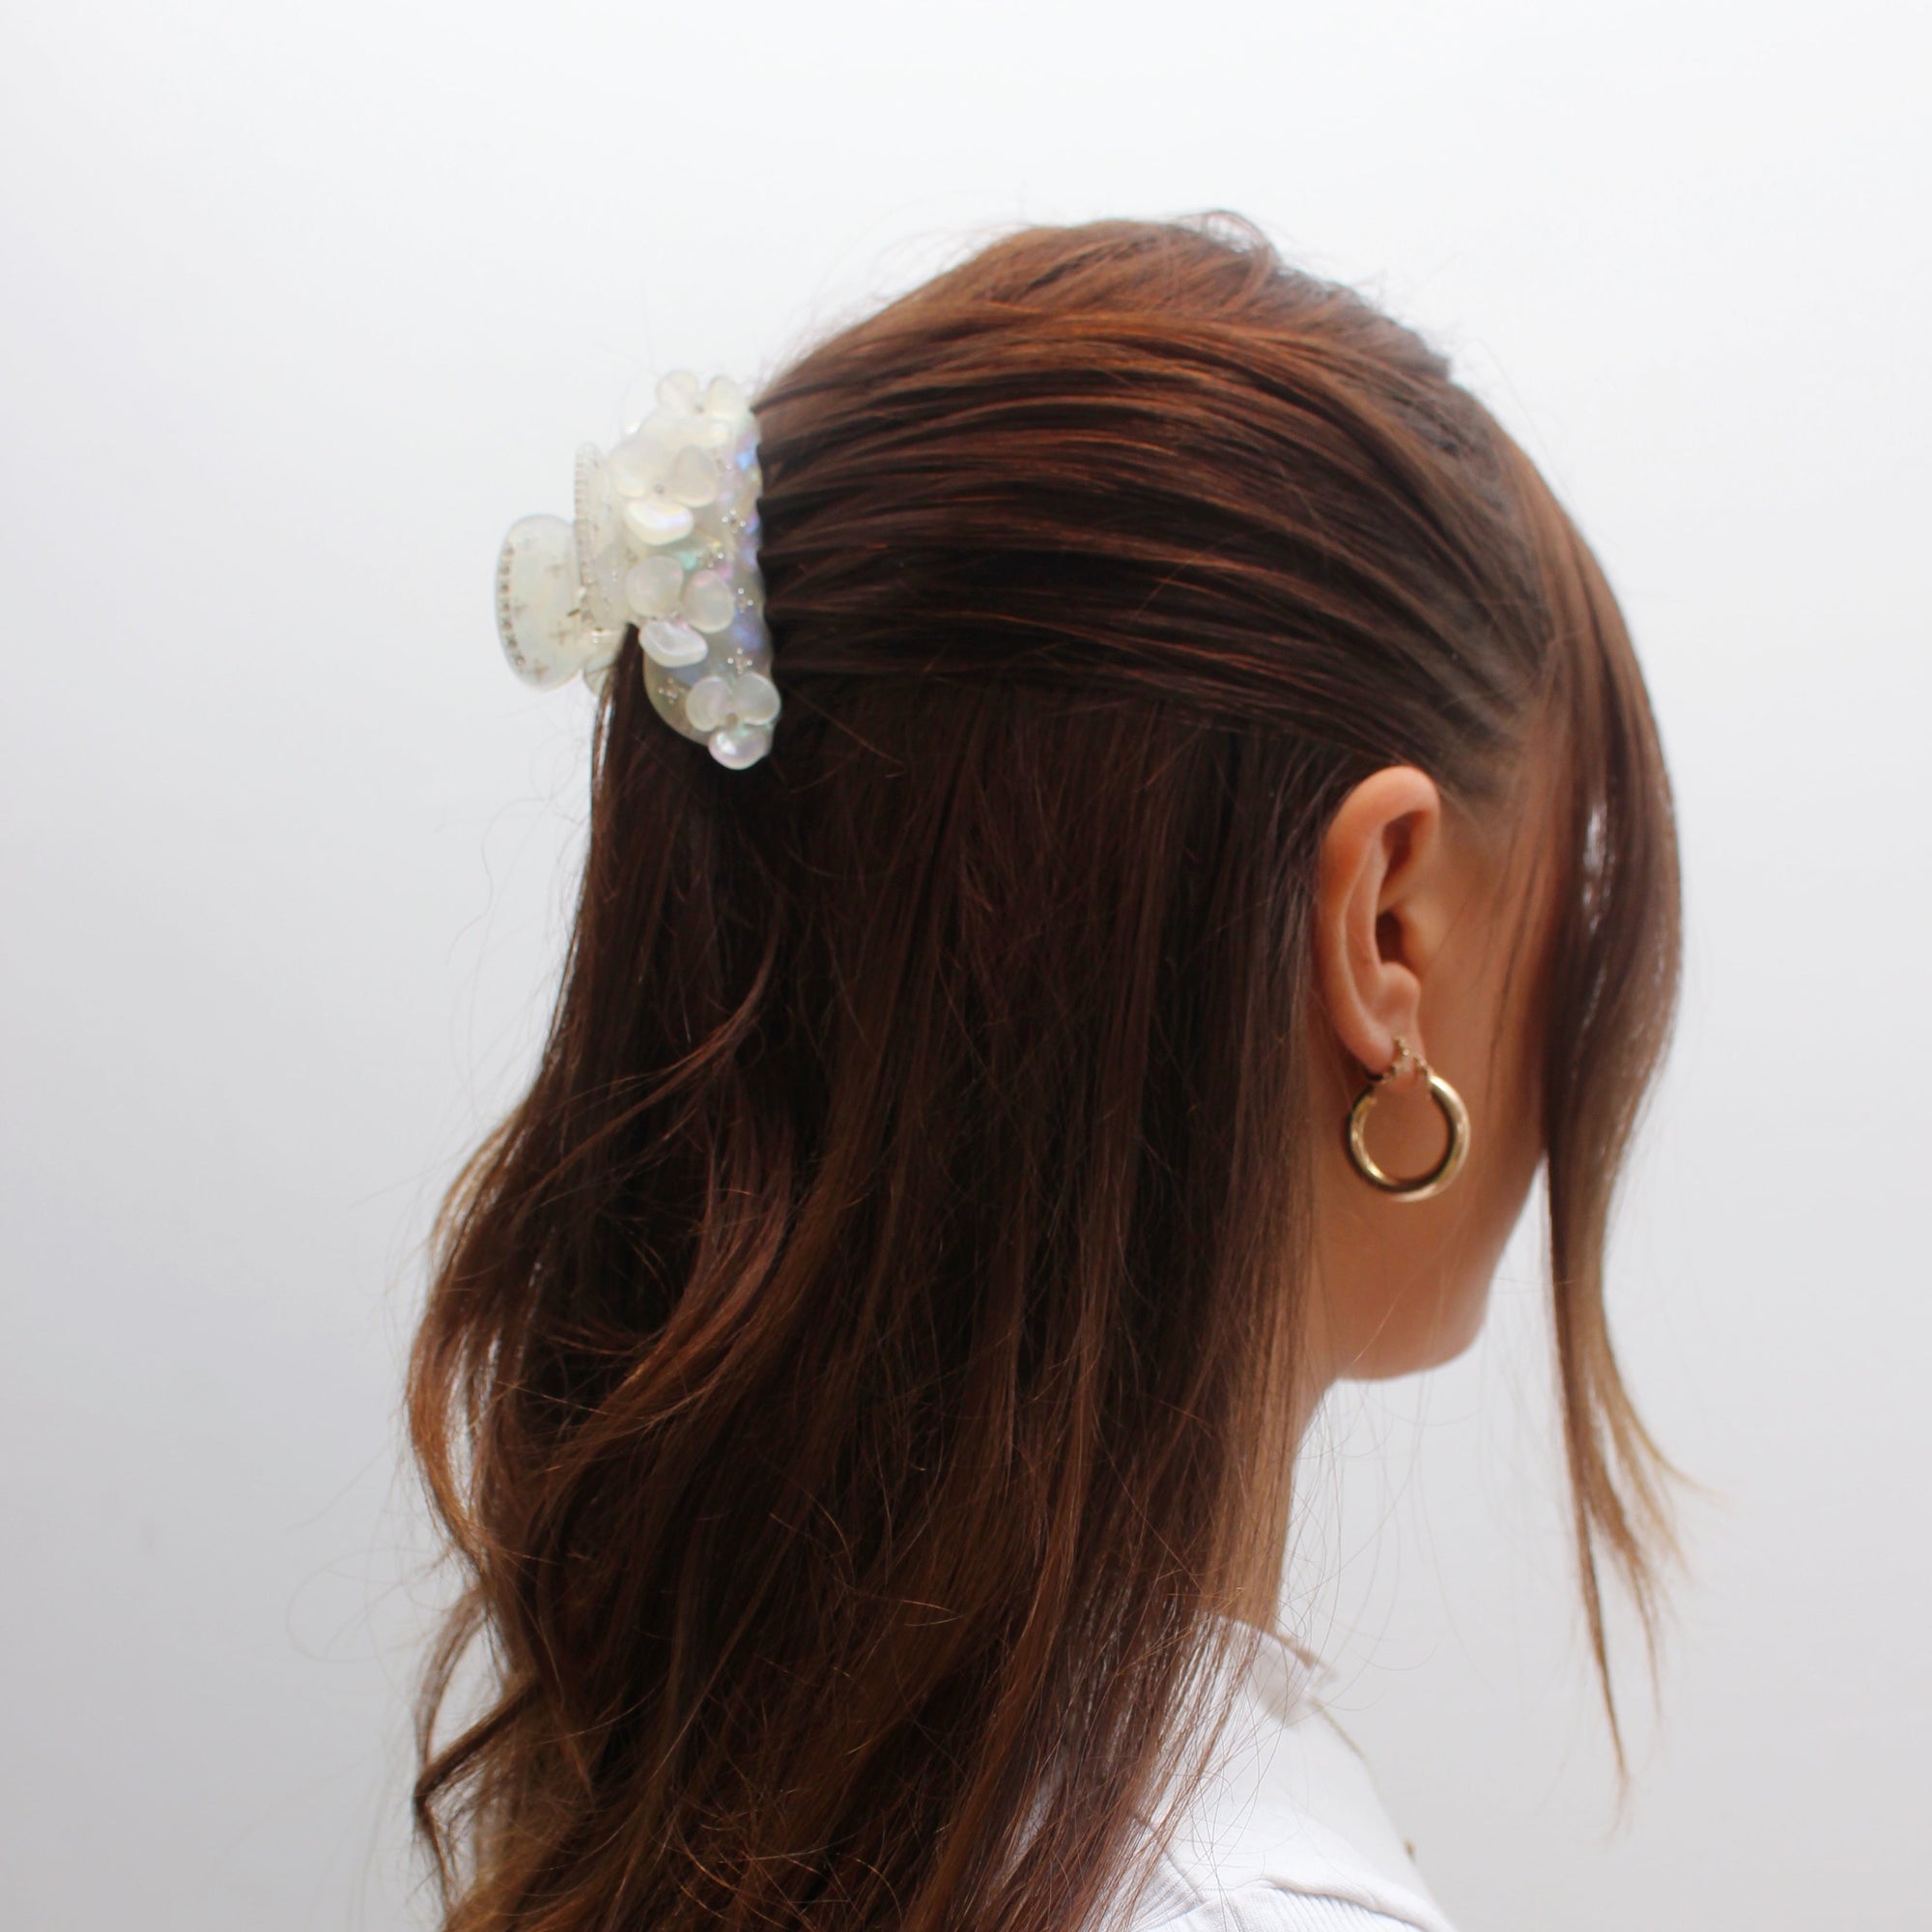 Meet JOAN!  A medium sized silhouette claw with flower and rhinestone details. The medium size makes it very easy to use and perfect for an all up look or securing a bun. For shorter hair it can be used for an all up look. It looks as cute off as on the hair.  Each clip comes in a branded Tort pouch (colours change seasonally).  Size: 7.5cm  Colour: pearlescent white with iridescent daisies and crystal rhinestone accents  Material: eco-resin